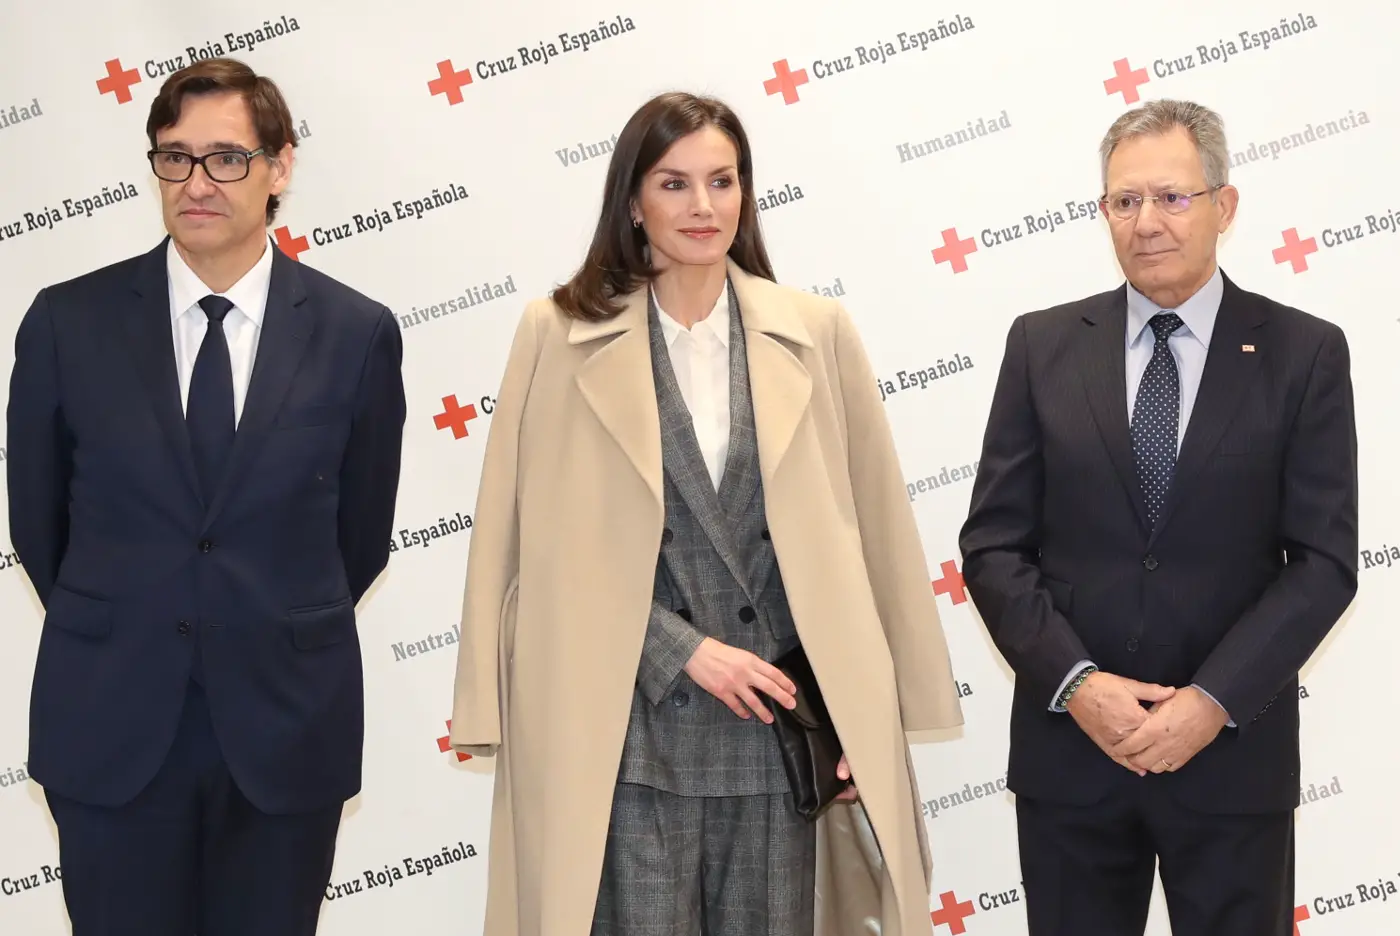 Queen Letizia wore Prince of Wales Print suit at Red cross Meeting